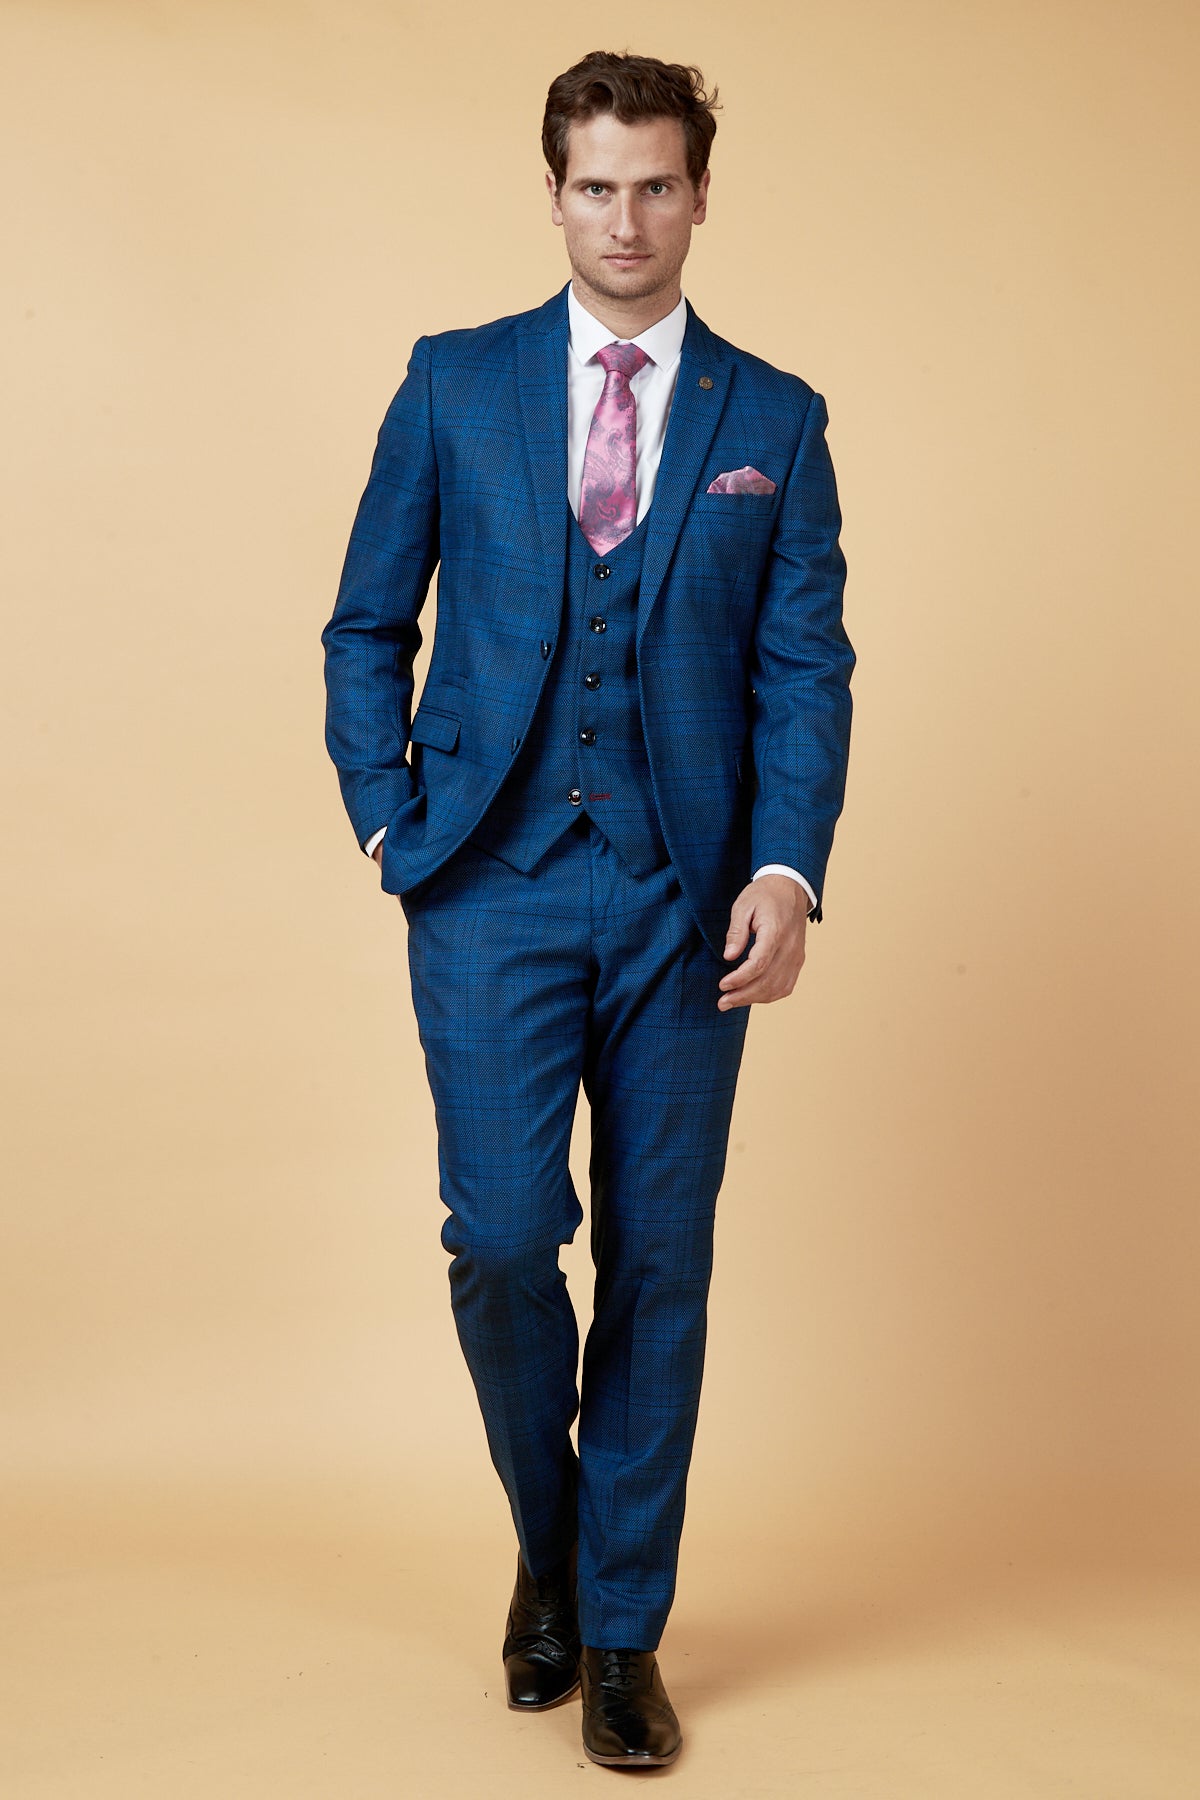 Work Suits | Men's Tailored Business Suits – Marc Darcy